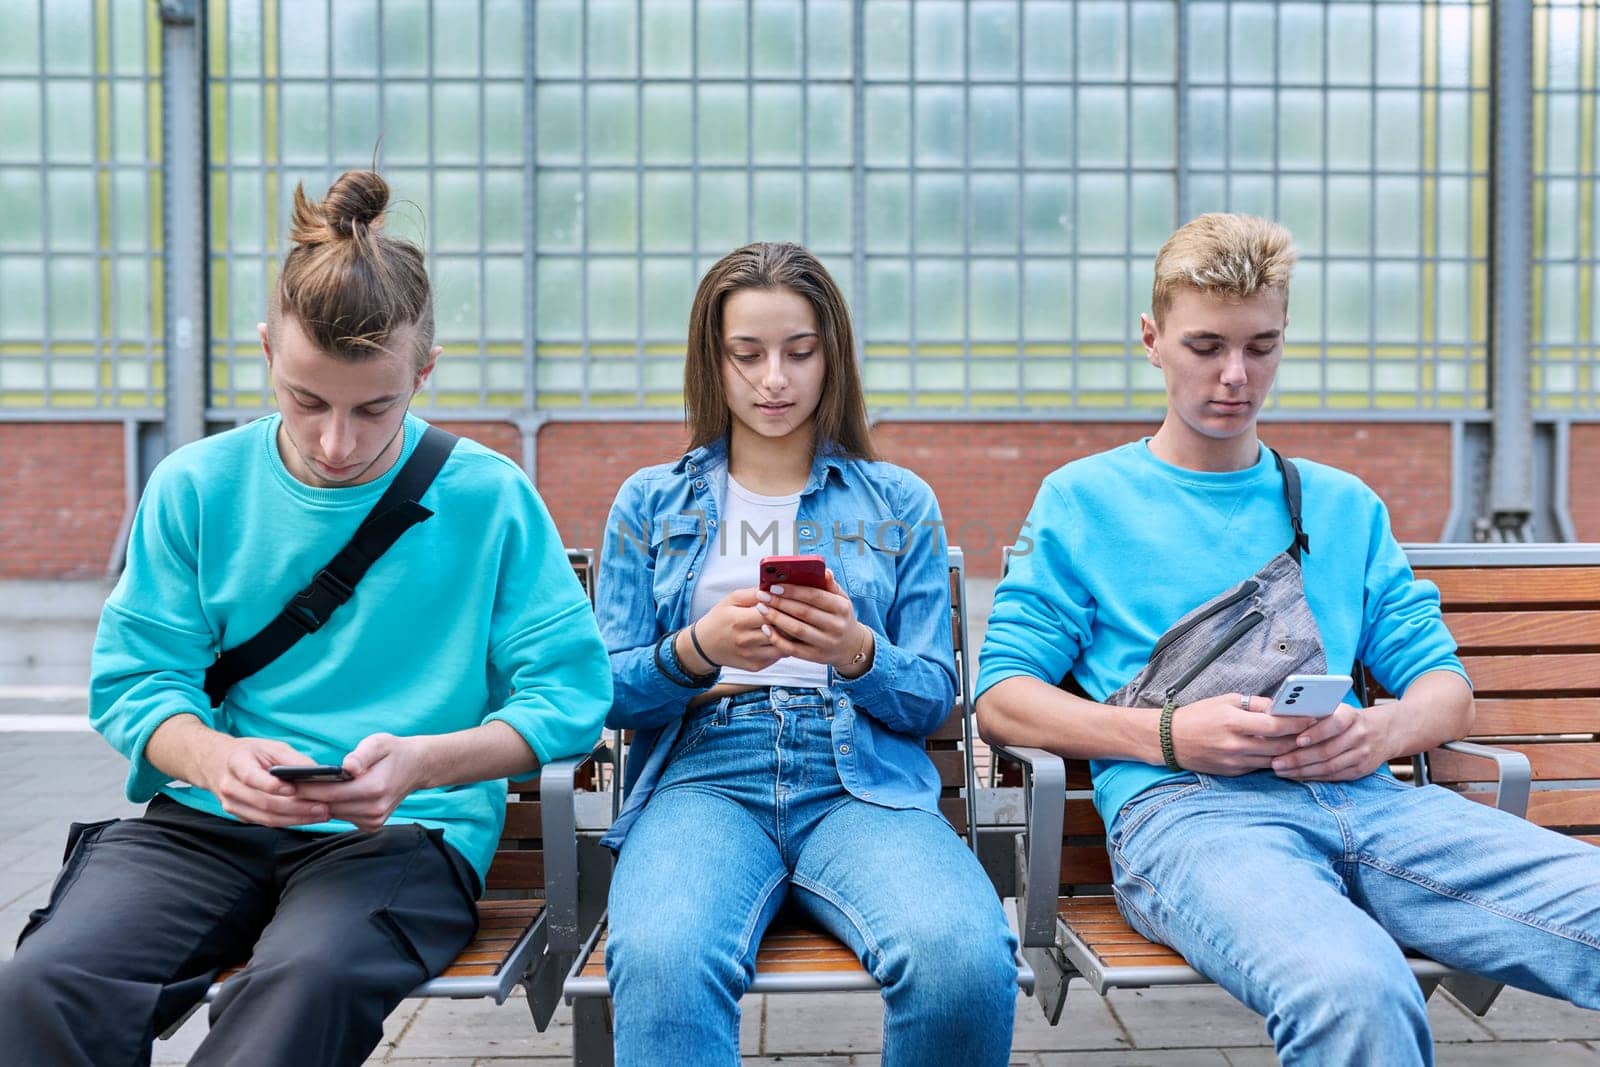 Group of teenage friends using smartphones sitting on chairs on train station platform. Youth, adolescence, digital technology, mobile applications, communication leisure learning social networks